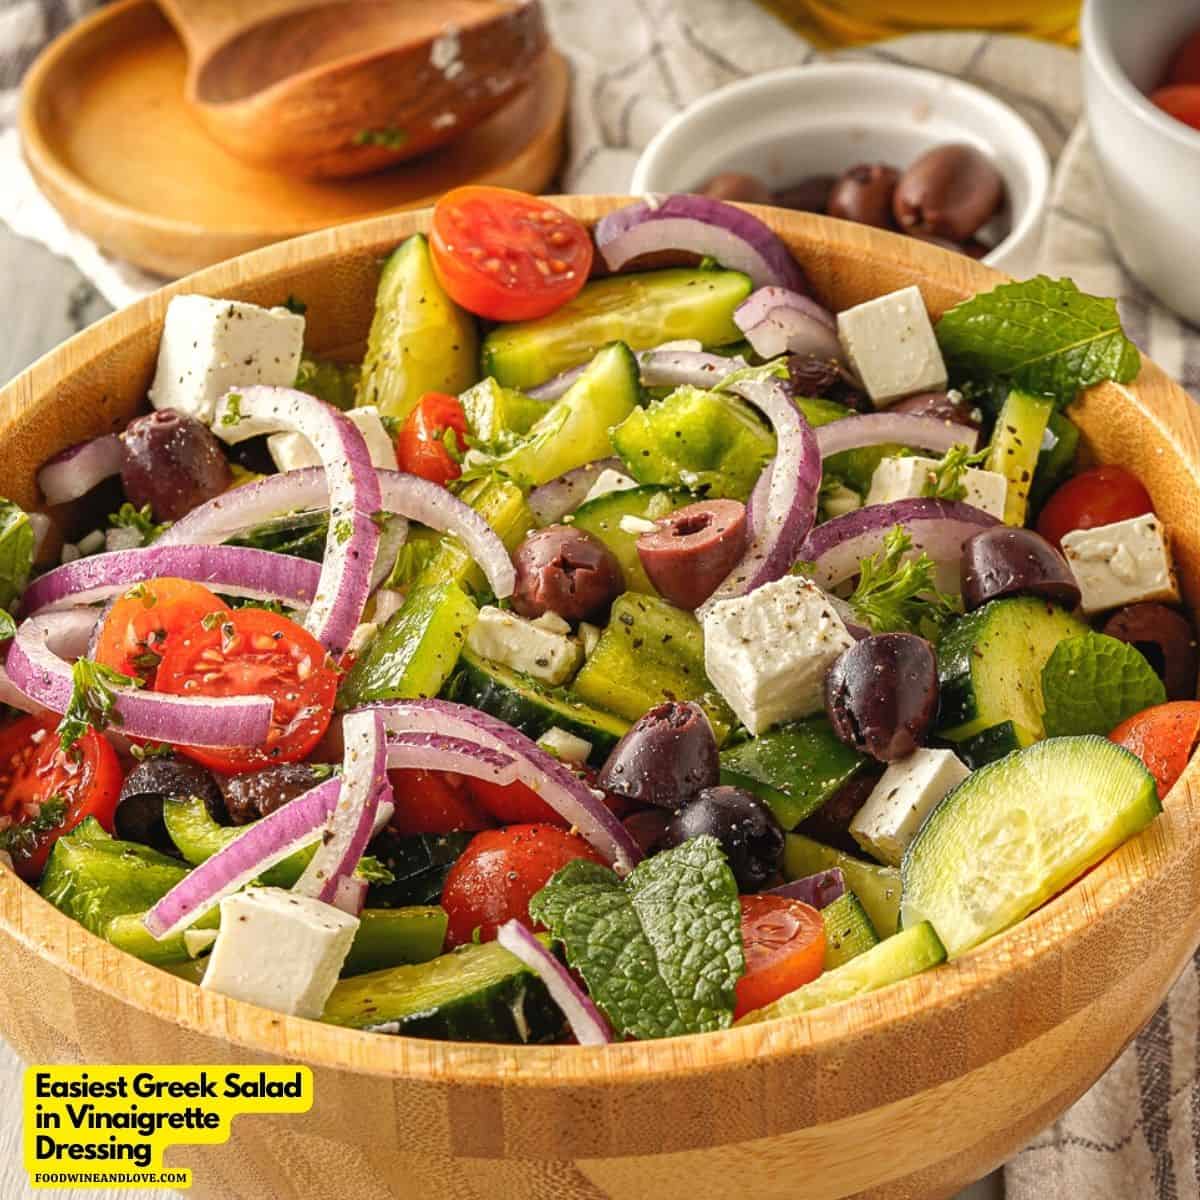 Easiest Greek Salad in Vinaigrette Dressing, a simple and delicious meal or side recipe made with healthy and fresh ingredients.